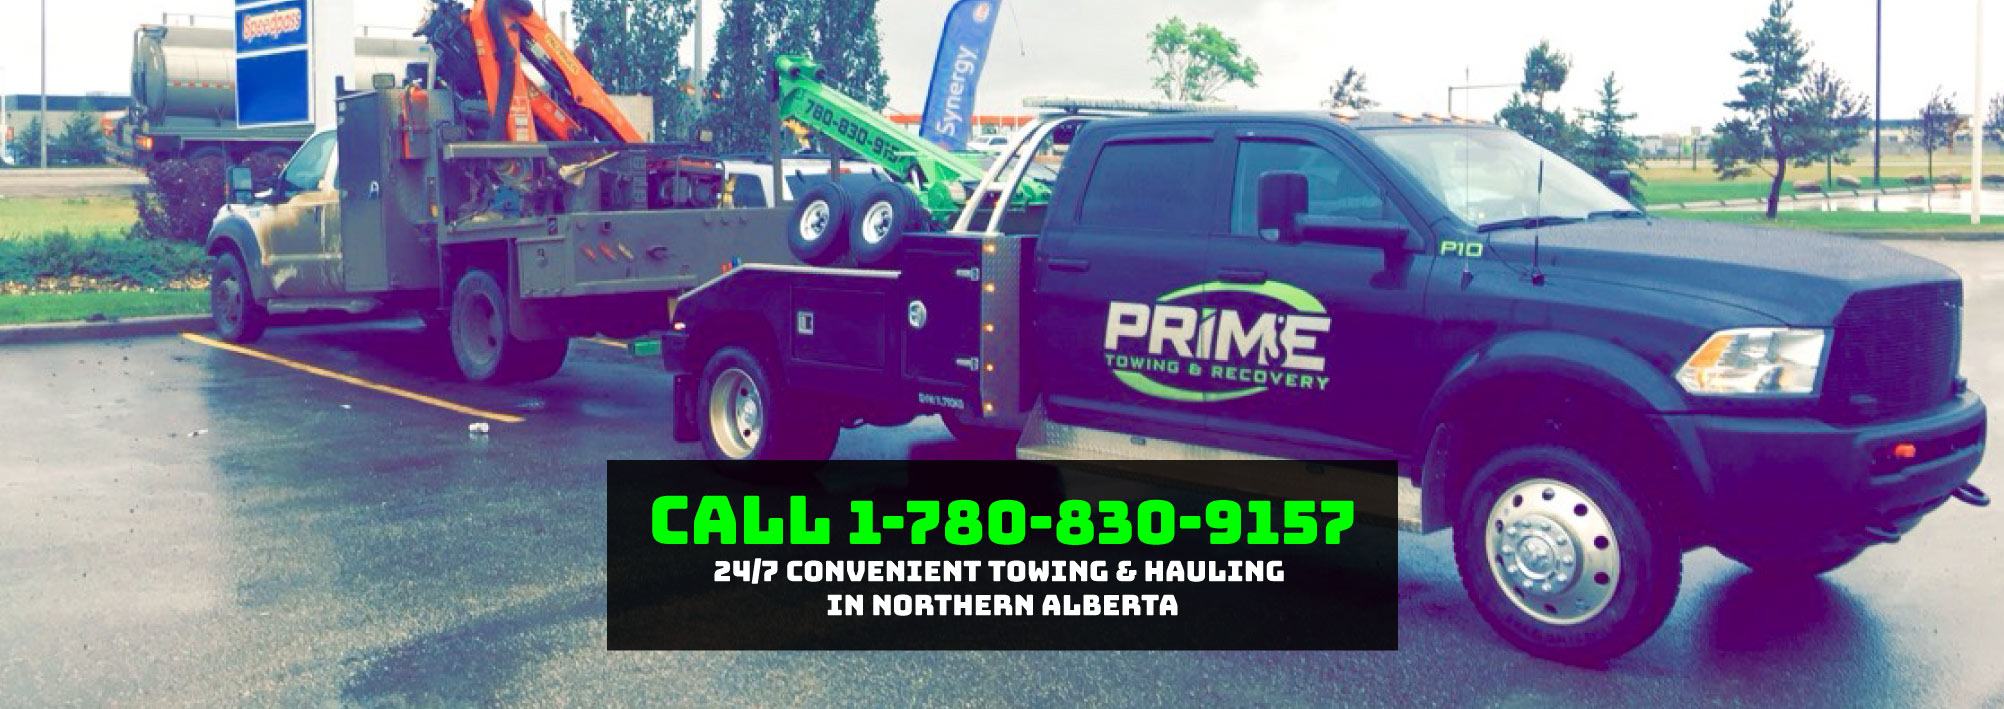 24/7 Convenient Towing & Hauling in Northern Alberta